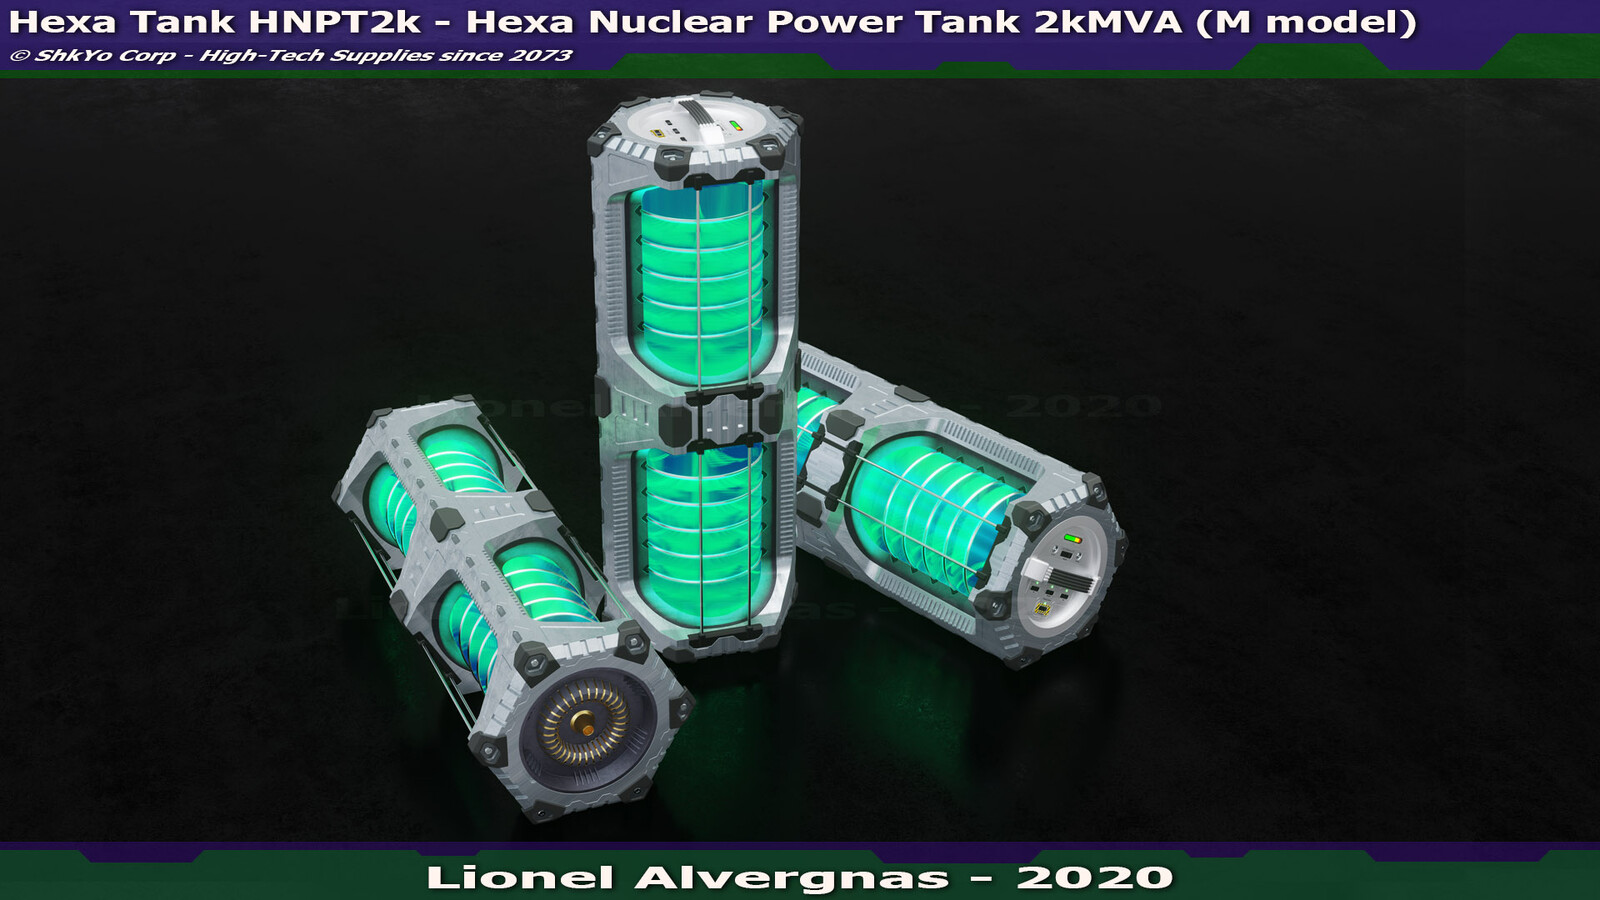 Hard Surface model - SciFi Hexa Nuclear Power Tank - XS and M model